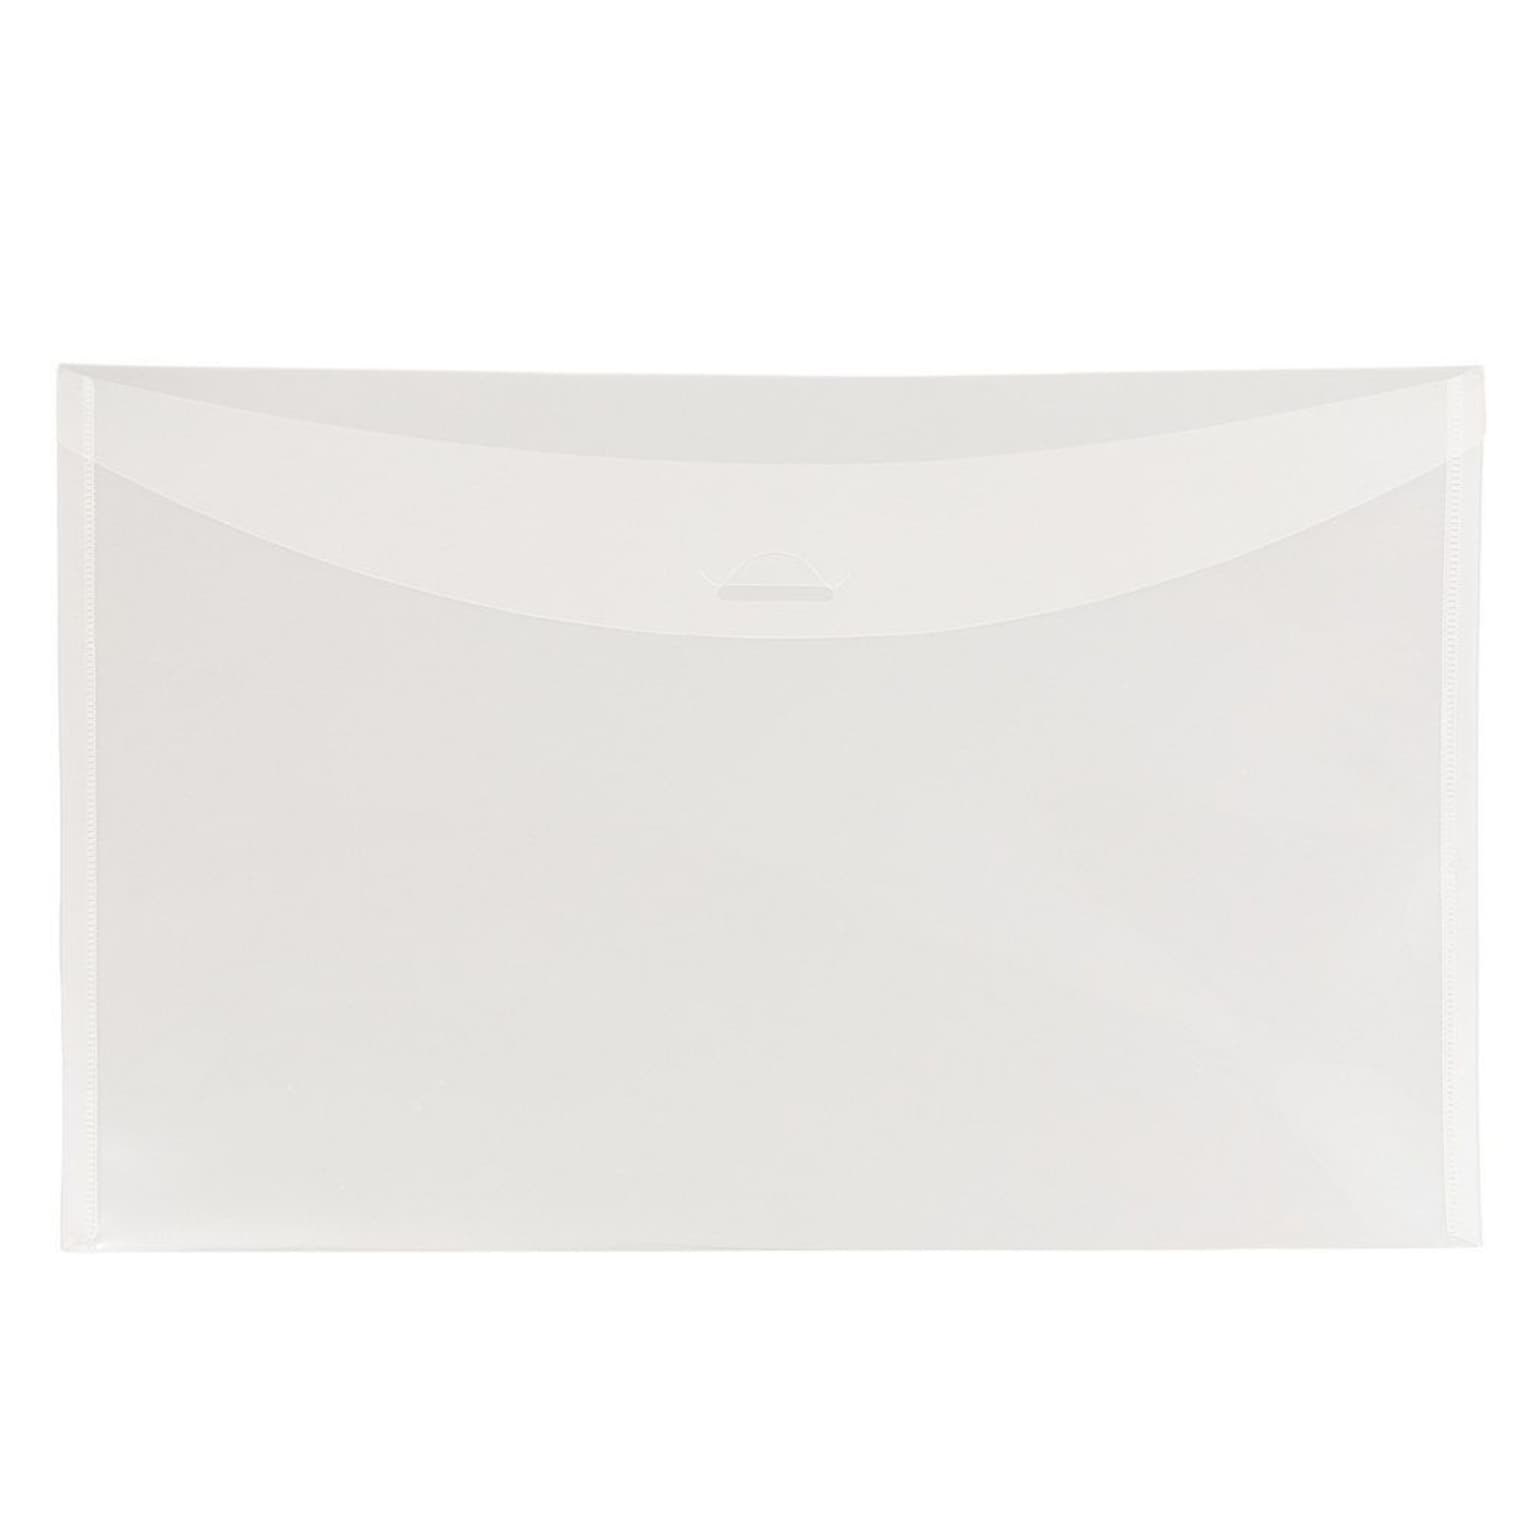 JAM Paper® Plastic Envelopes with Tuck Flap Closure, Booklet, 6 x 9, Clear, 12/Pack (1541748)